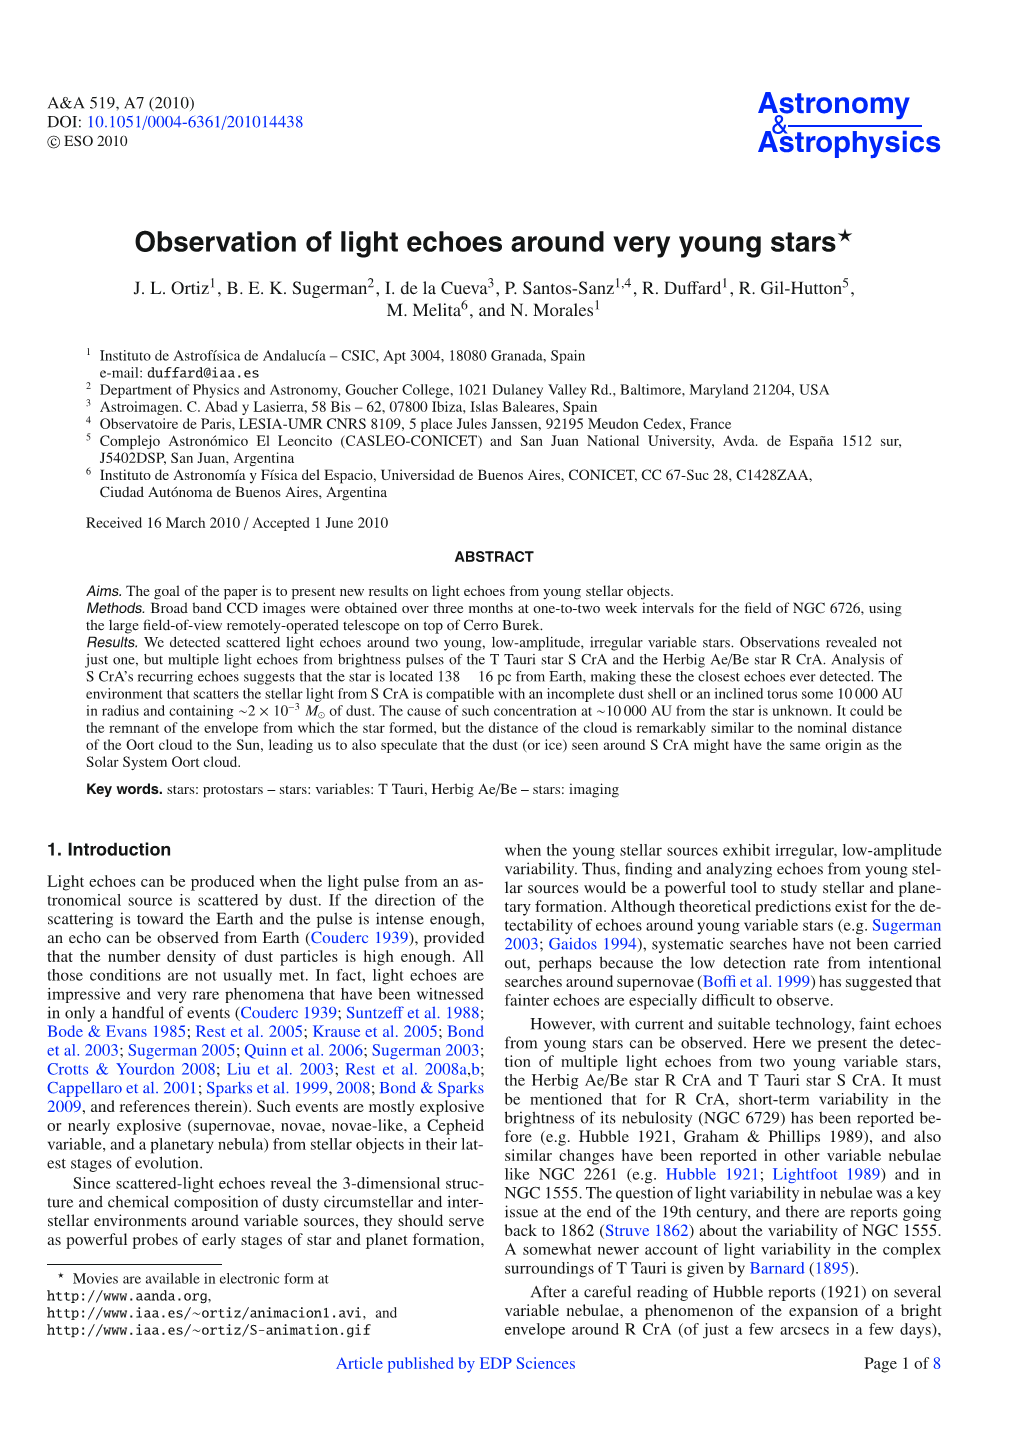 Observation of Light Echoes Around Very Young Stars*